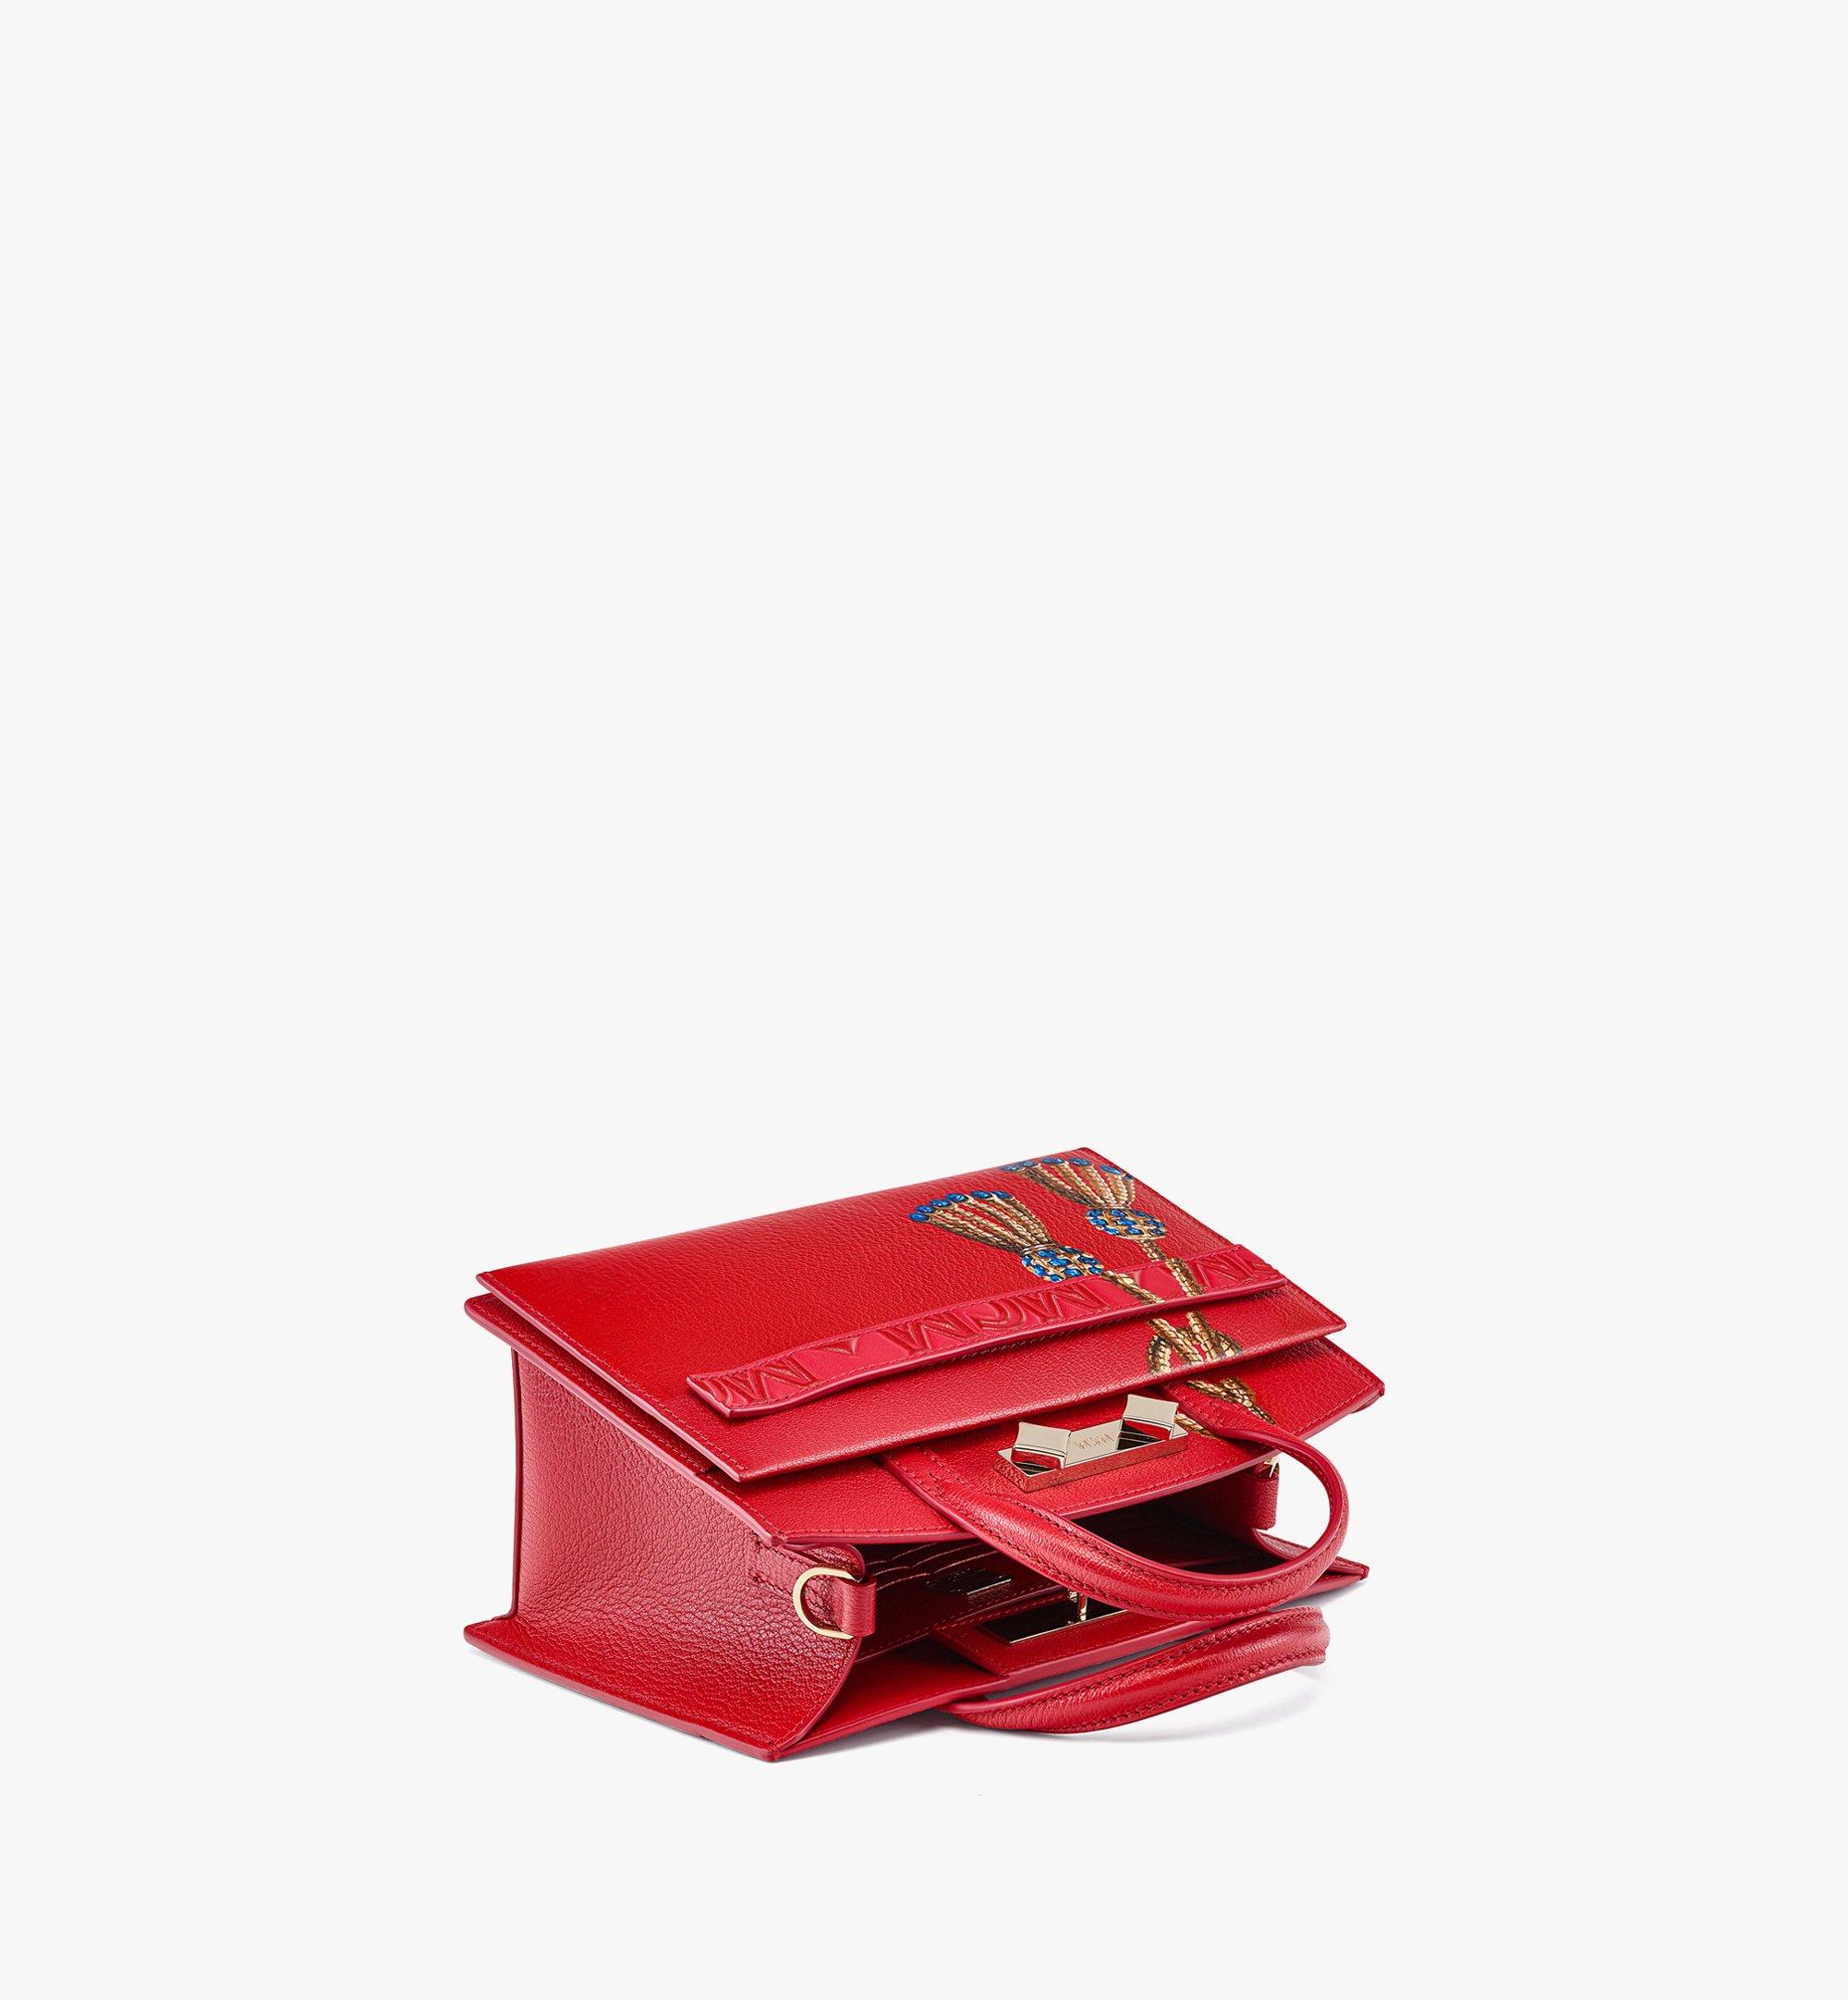 MCM Upcycling Project Jewelry Milano Tote in Goatskin Leather Red MWTCSUP02RU001 Alternate View 2